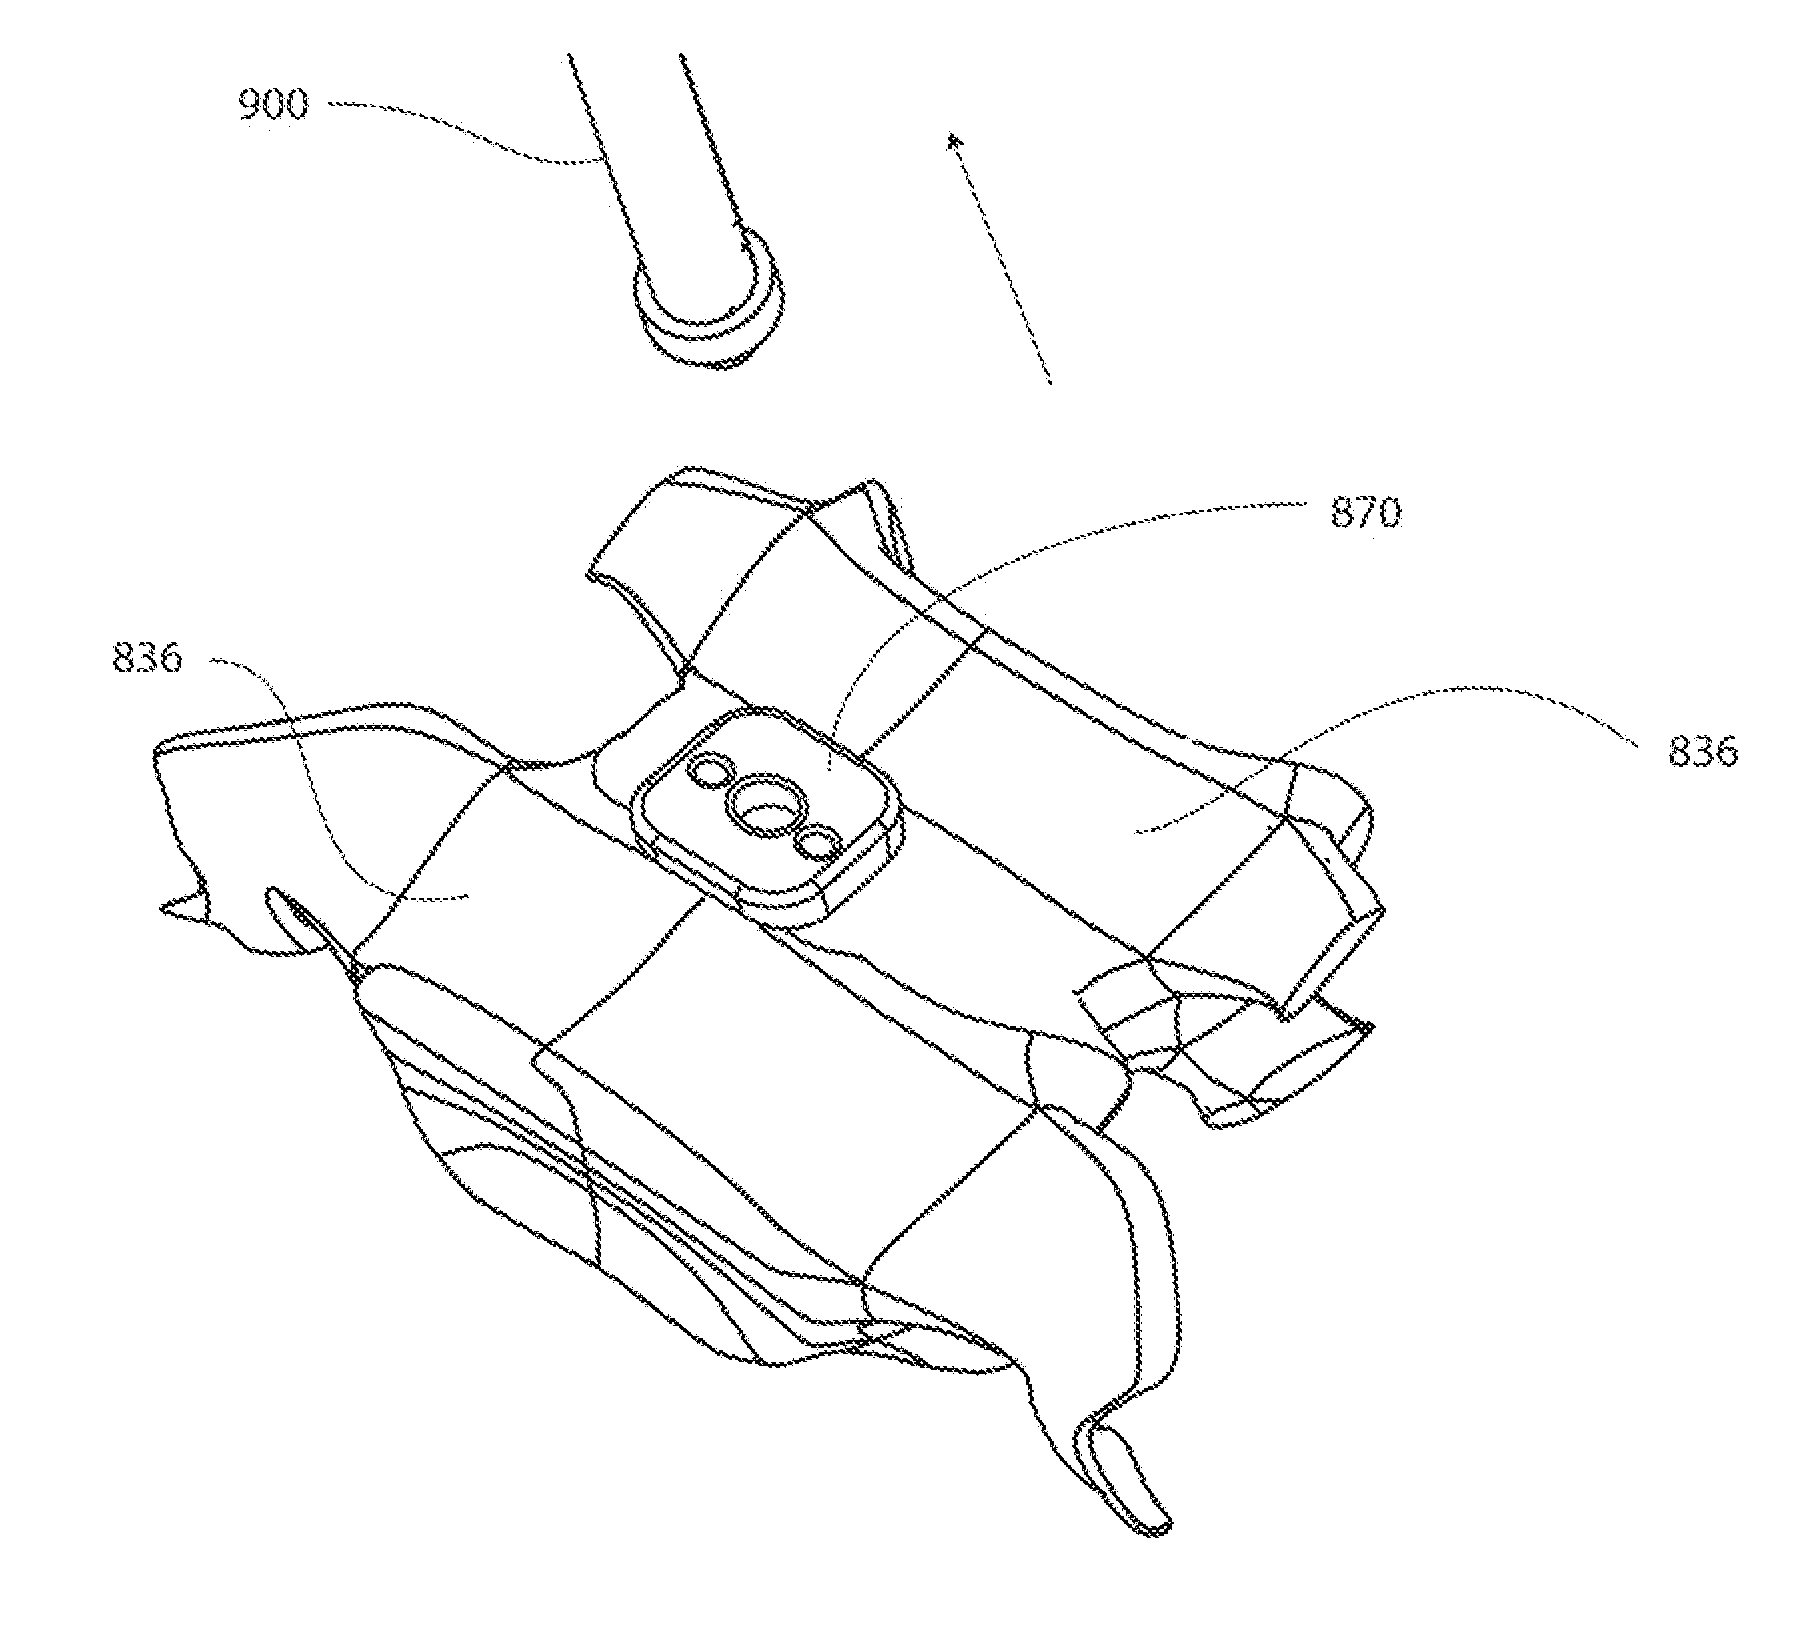 Implantable vertebral frame systems and related methods for spinal repair